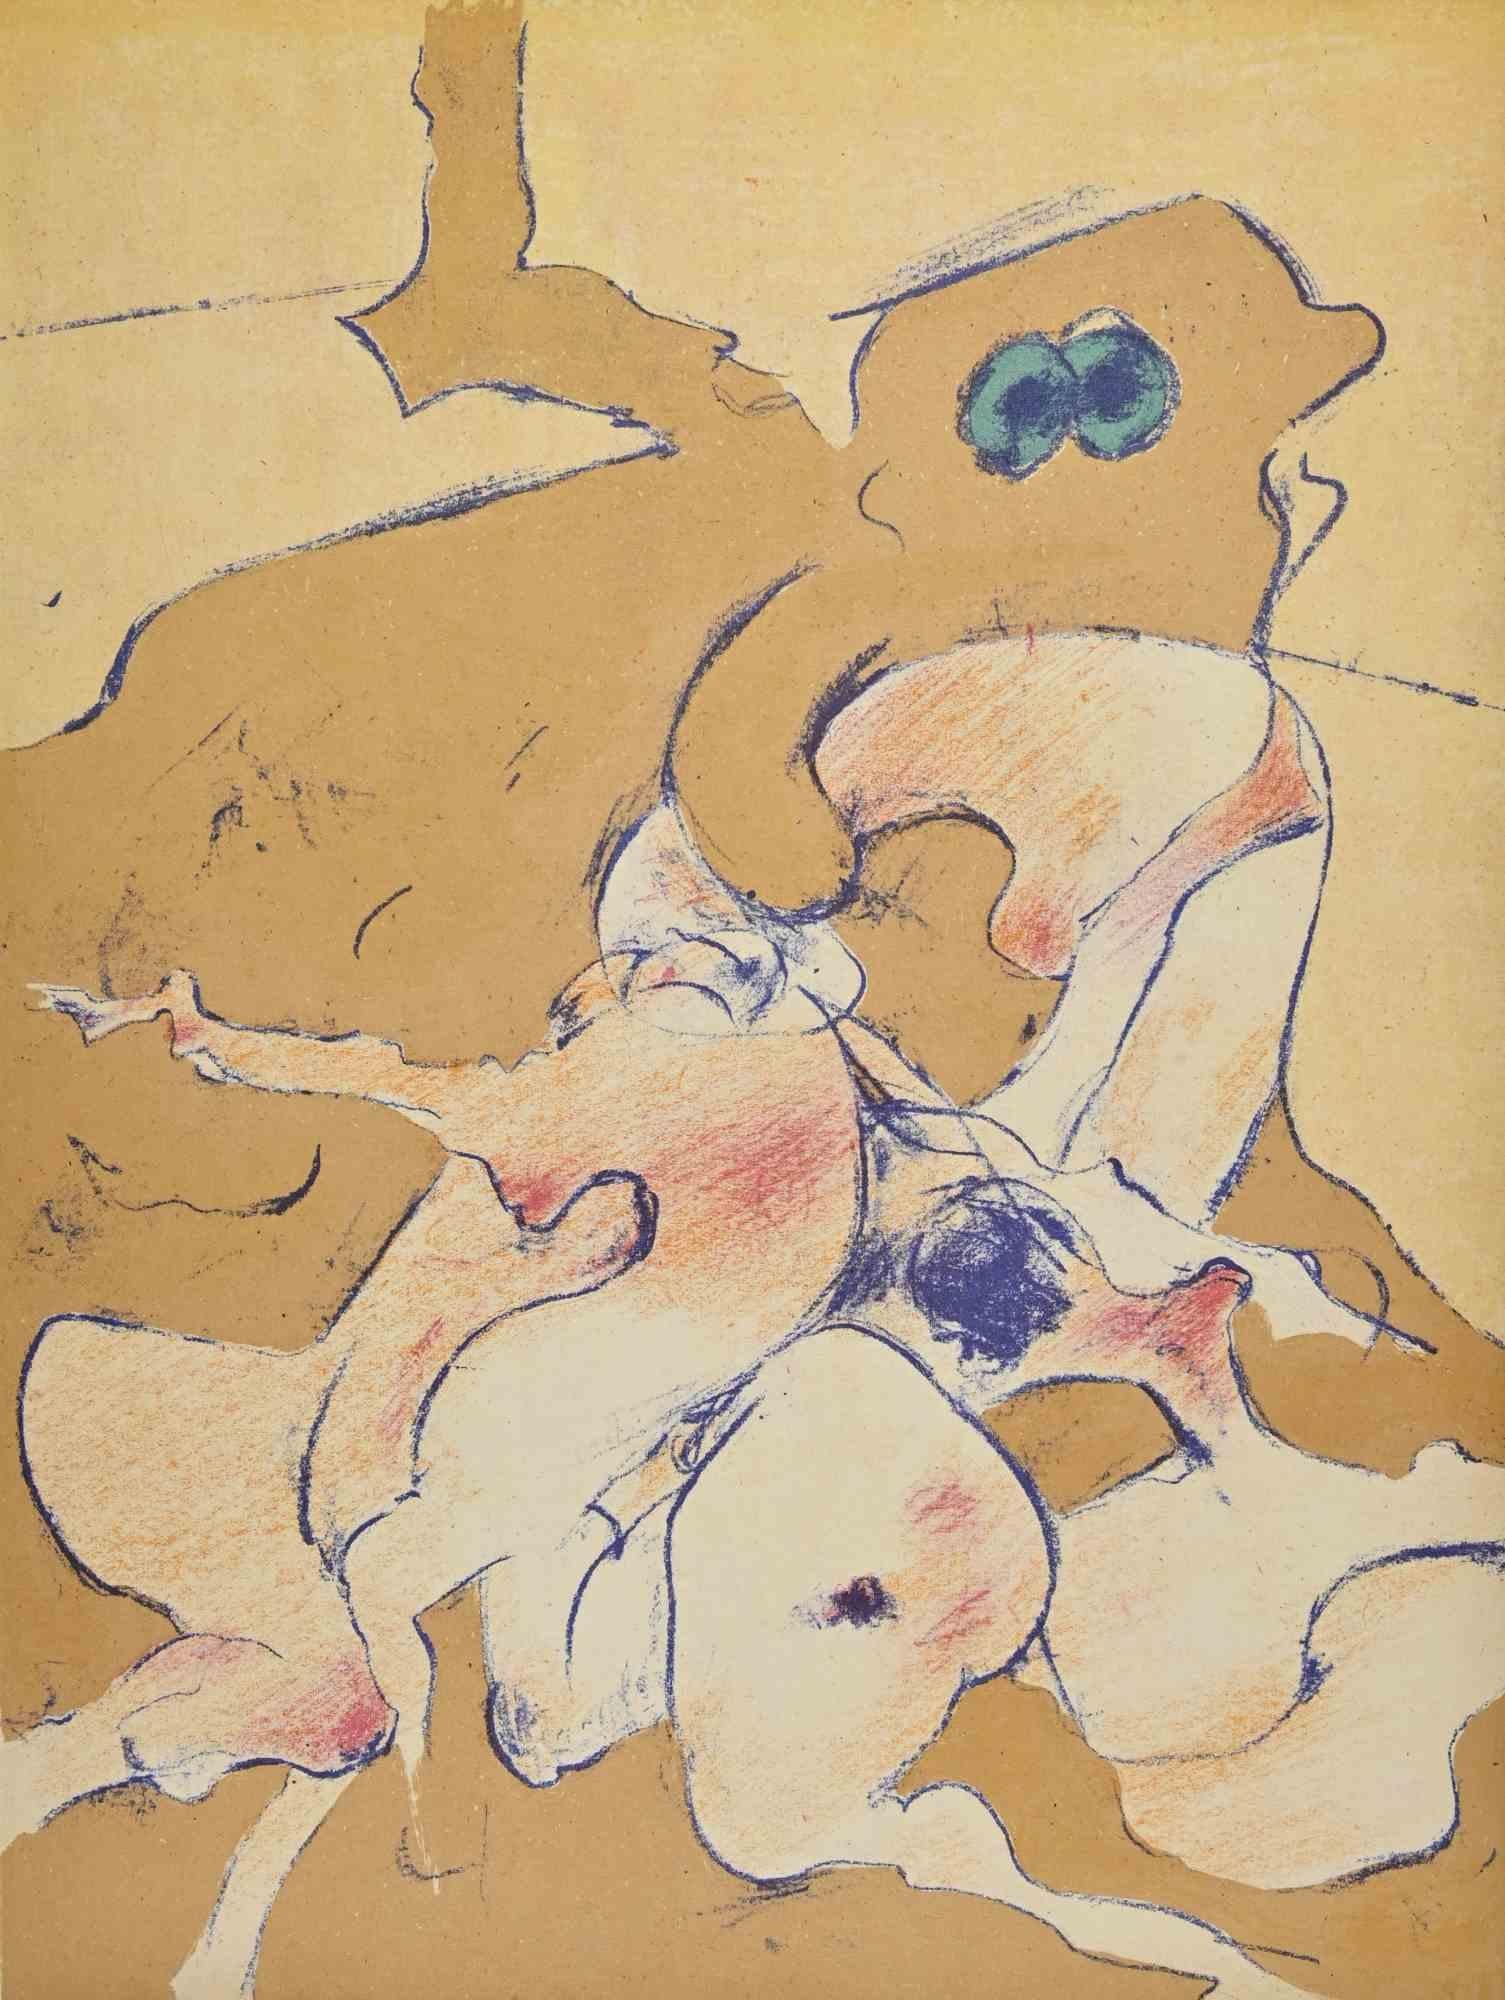 Untitled - Lithograph by Dorothea Tanning - 1974